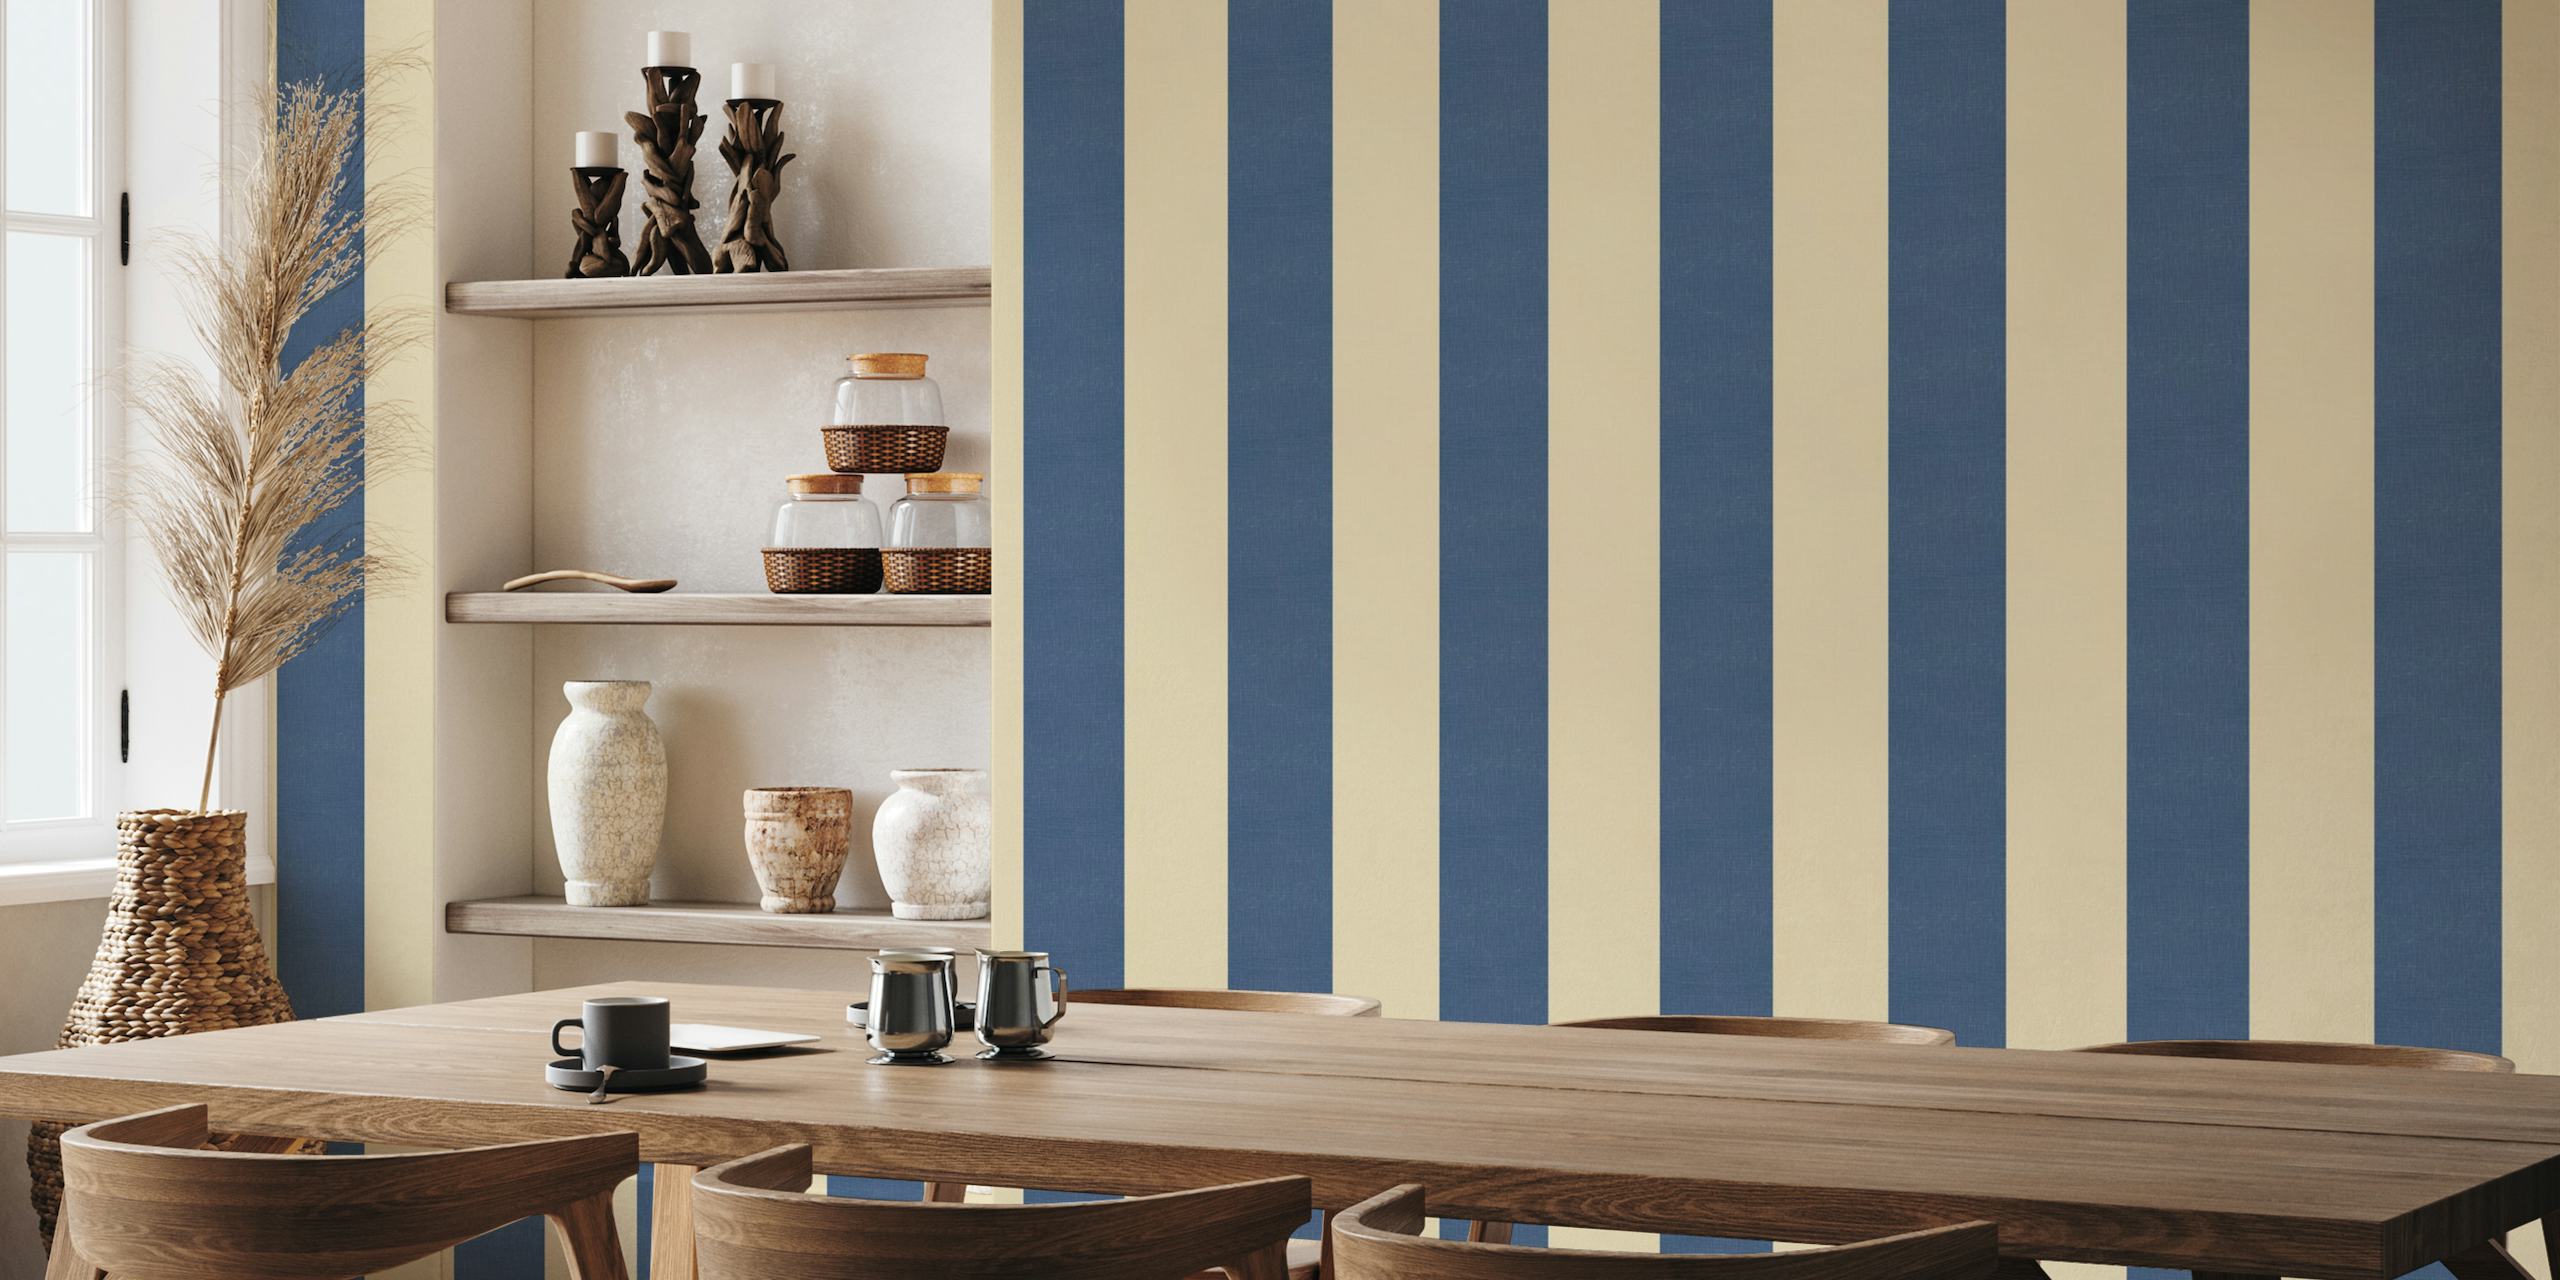 Wide textured stripes - navy blue and beige ταπετσαρία